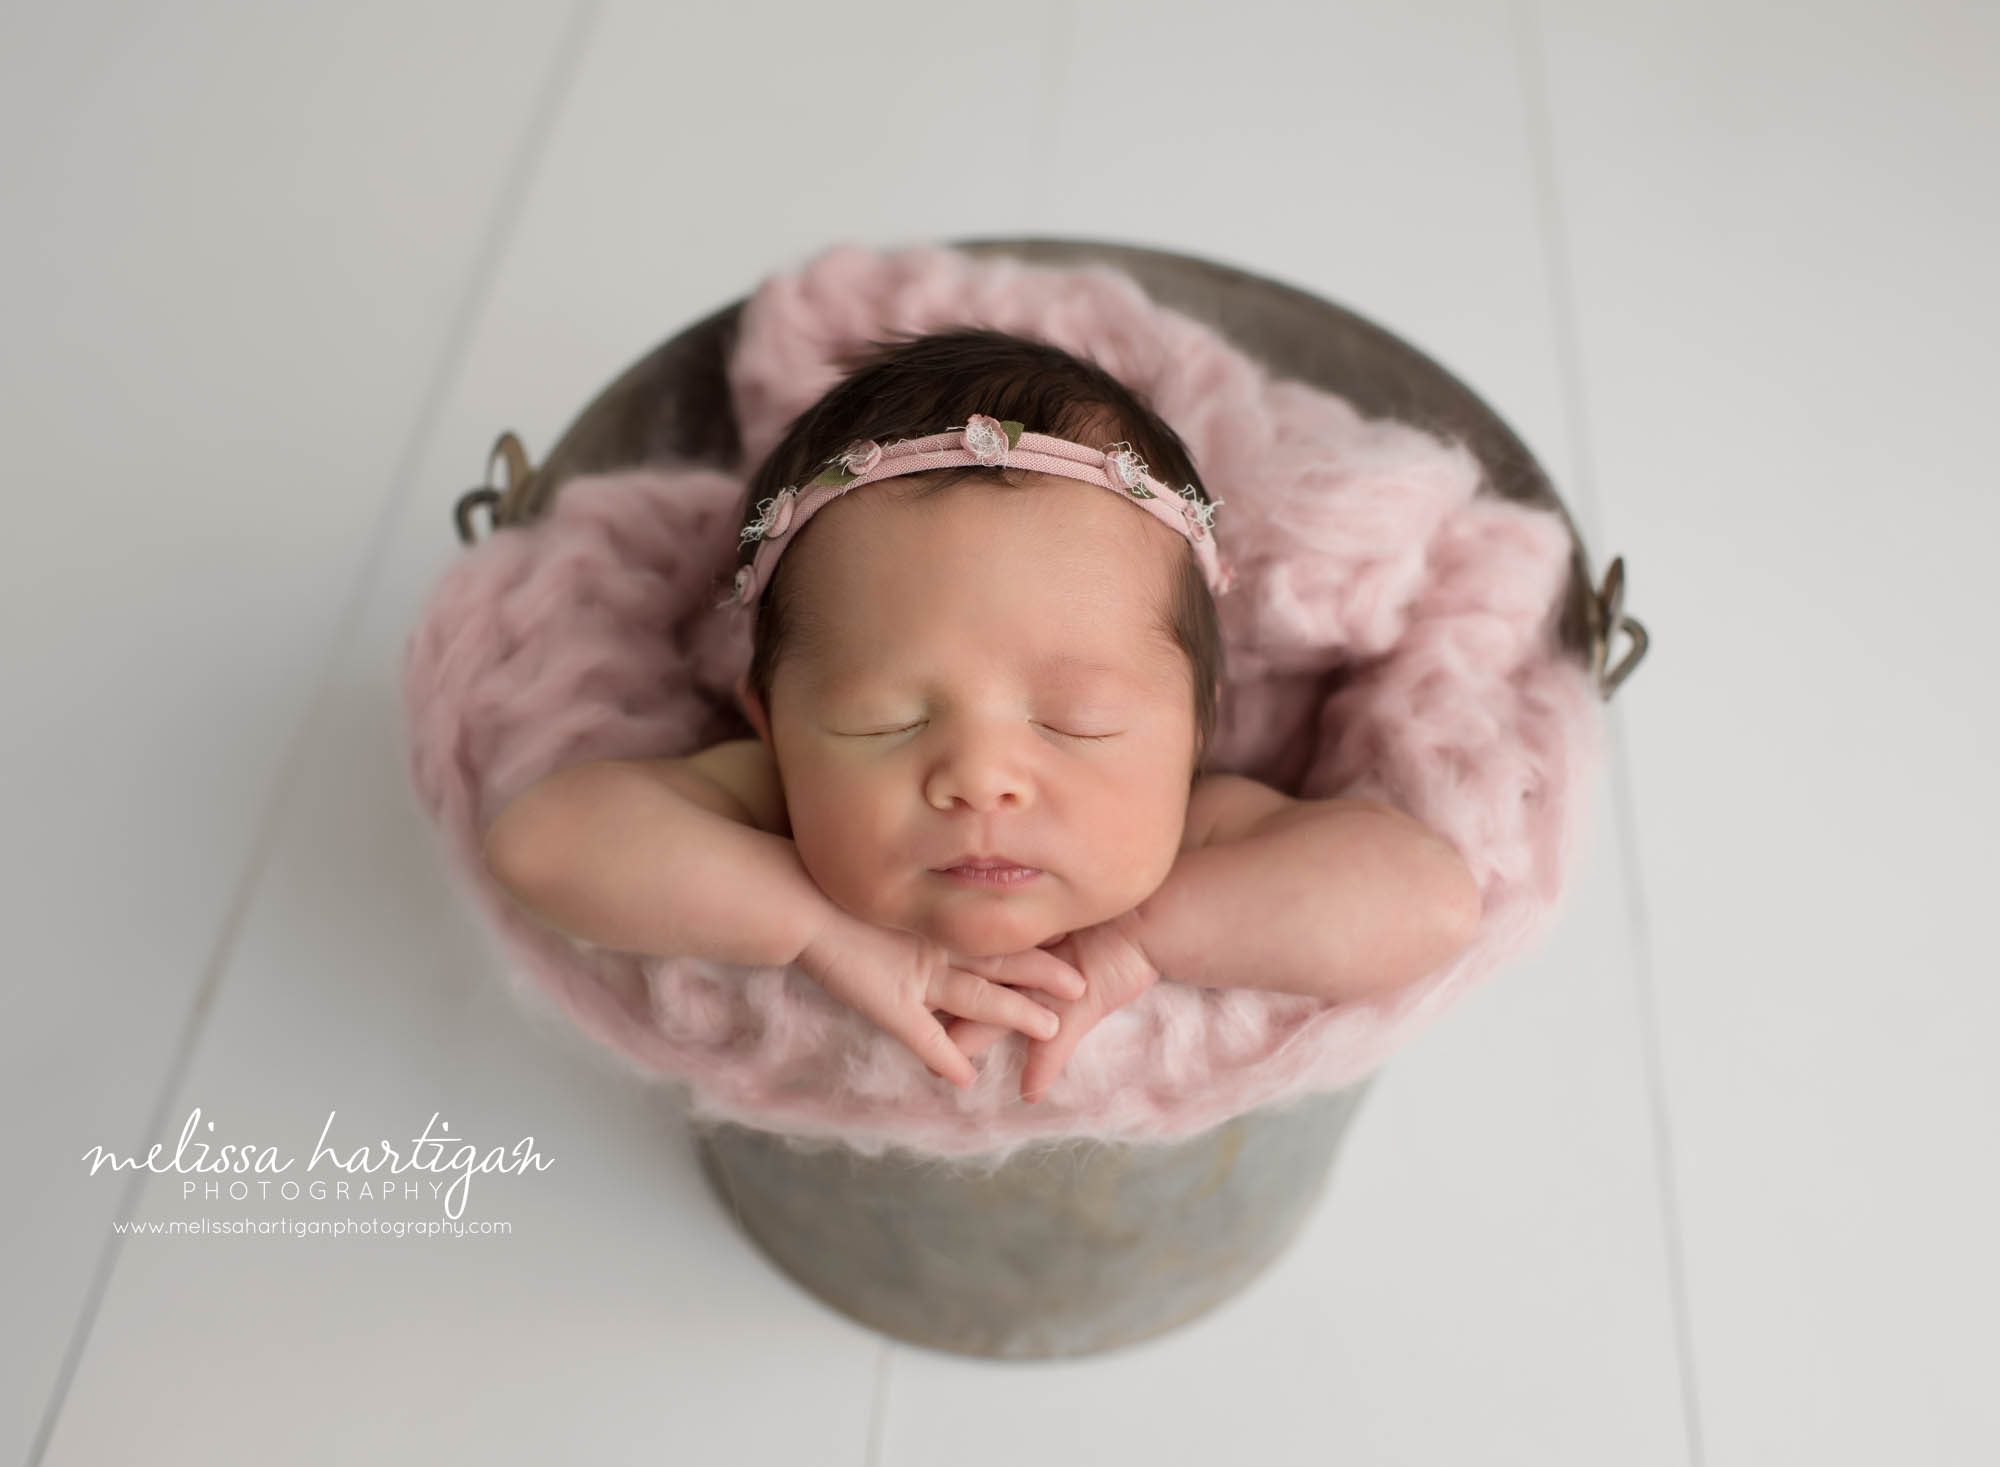 newborn baby girl posed in bucket wearing pink headband with tiny pink rosebuds